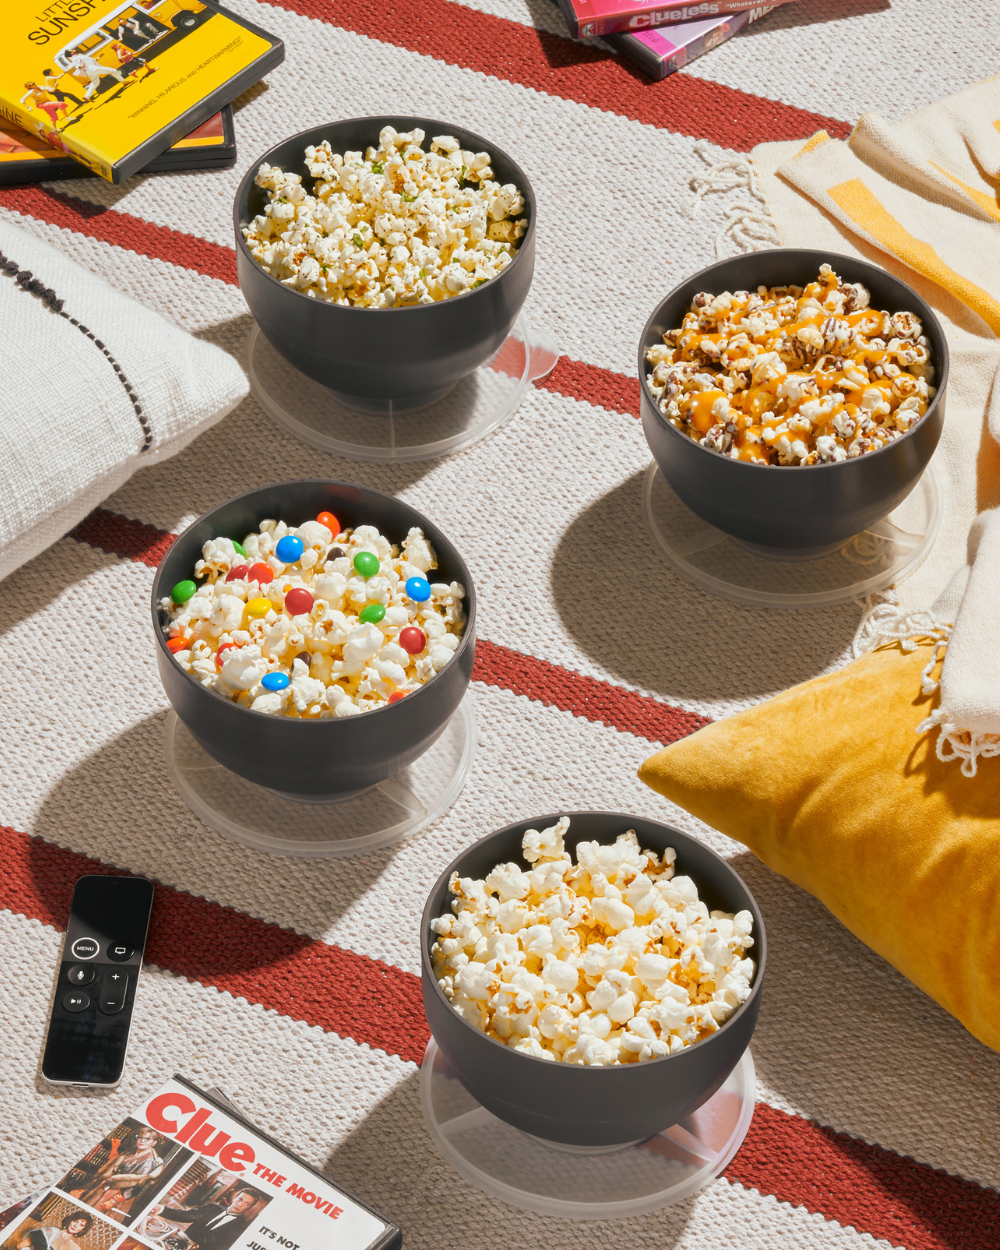 9 best popcorn makers to sweeten up your home movie watching